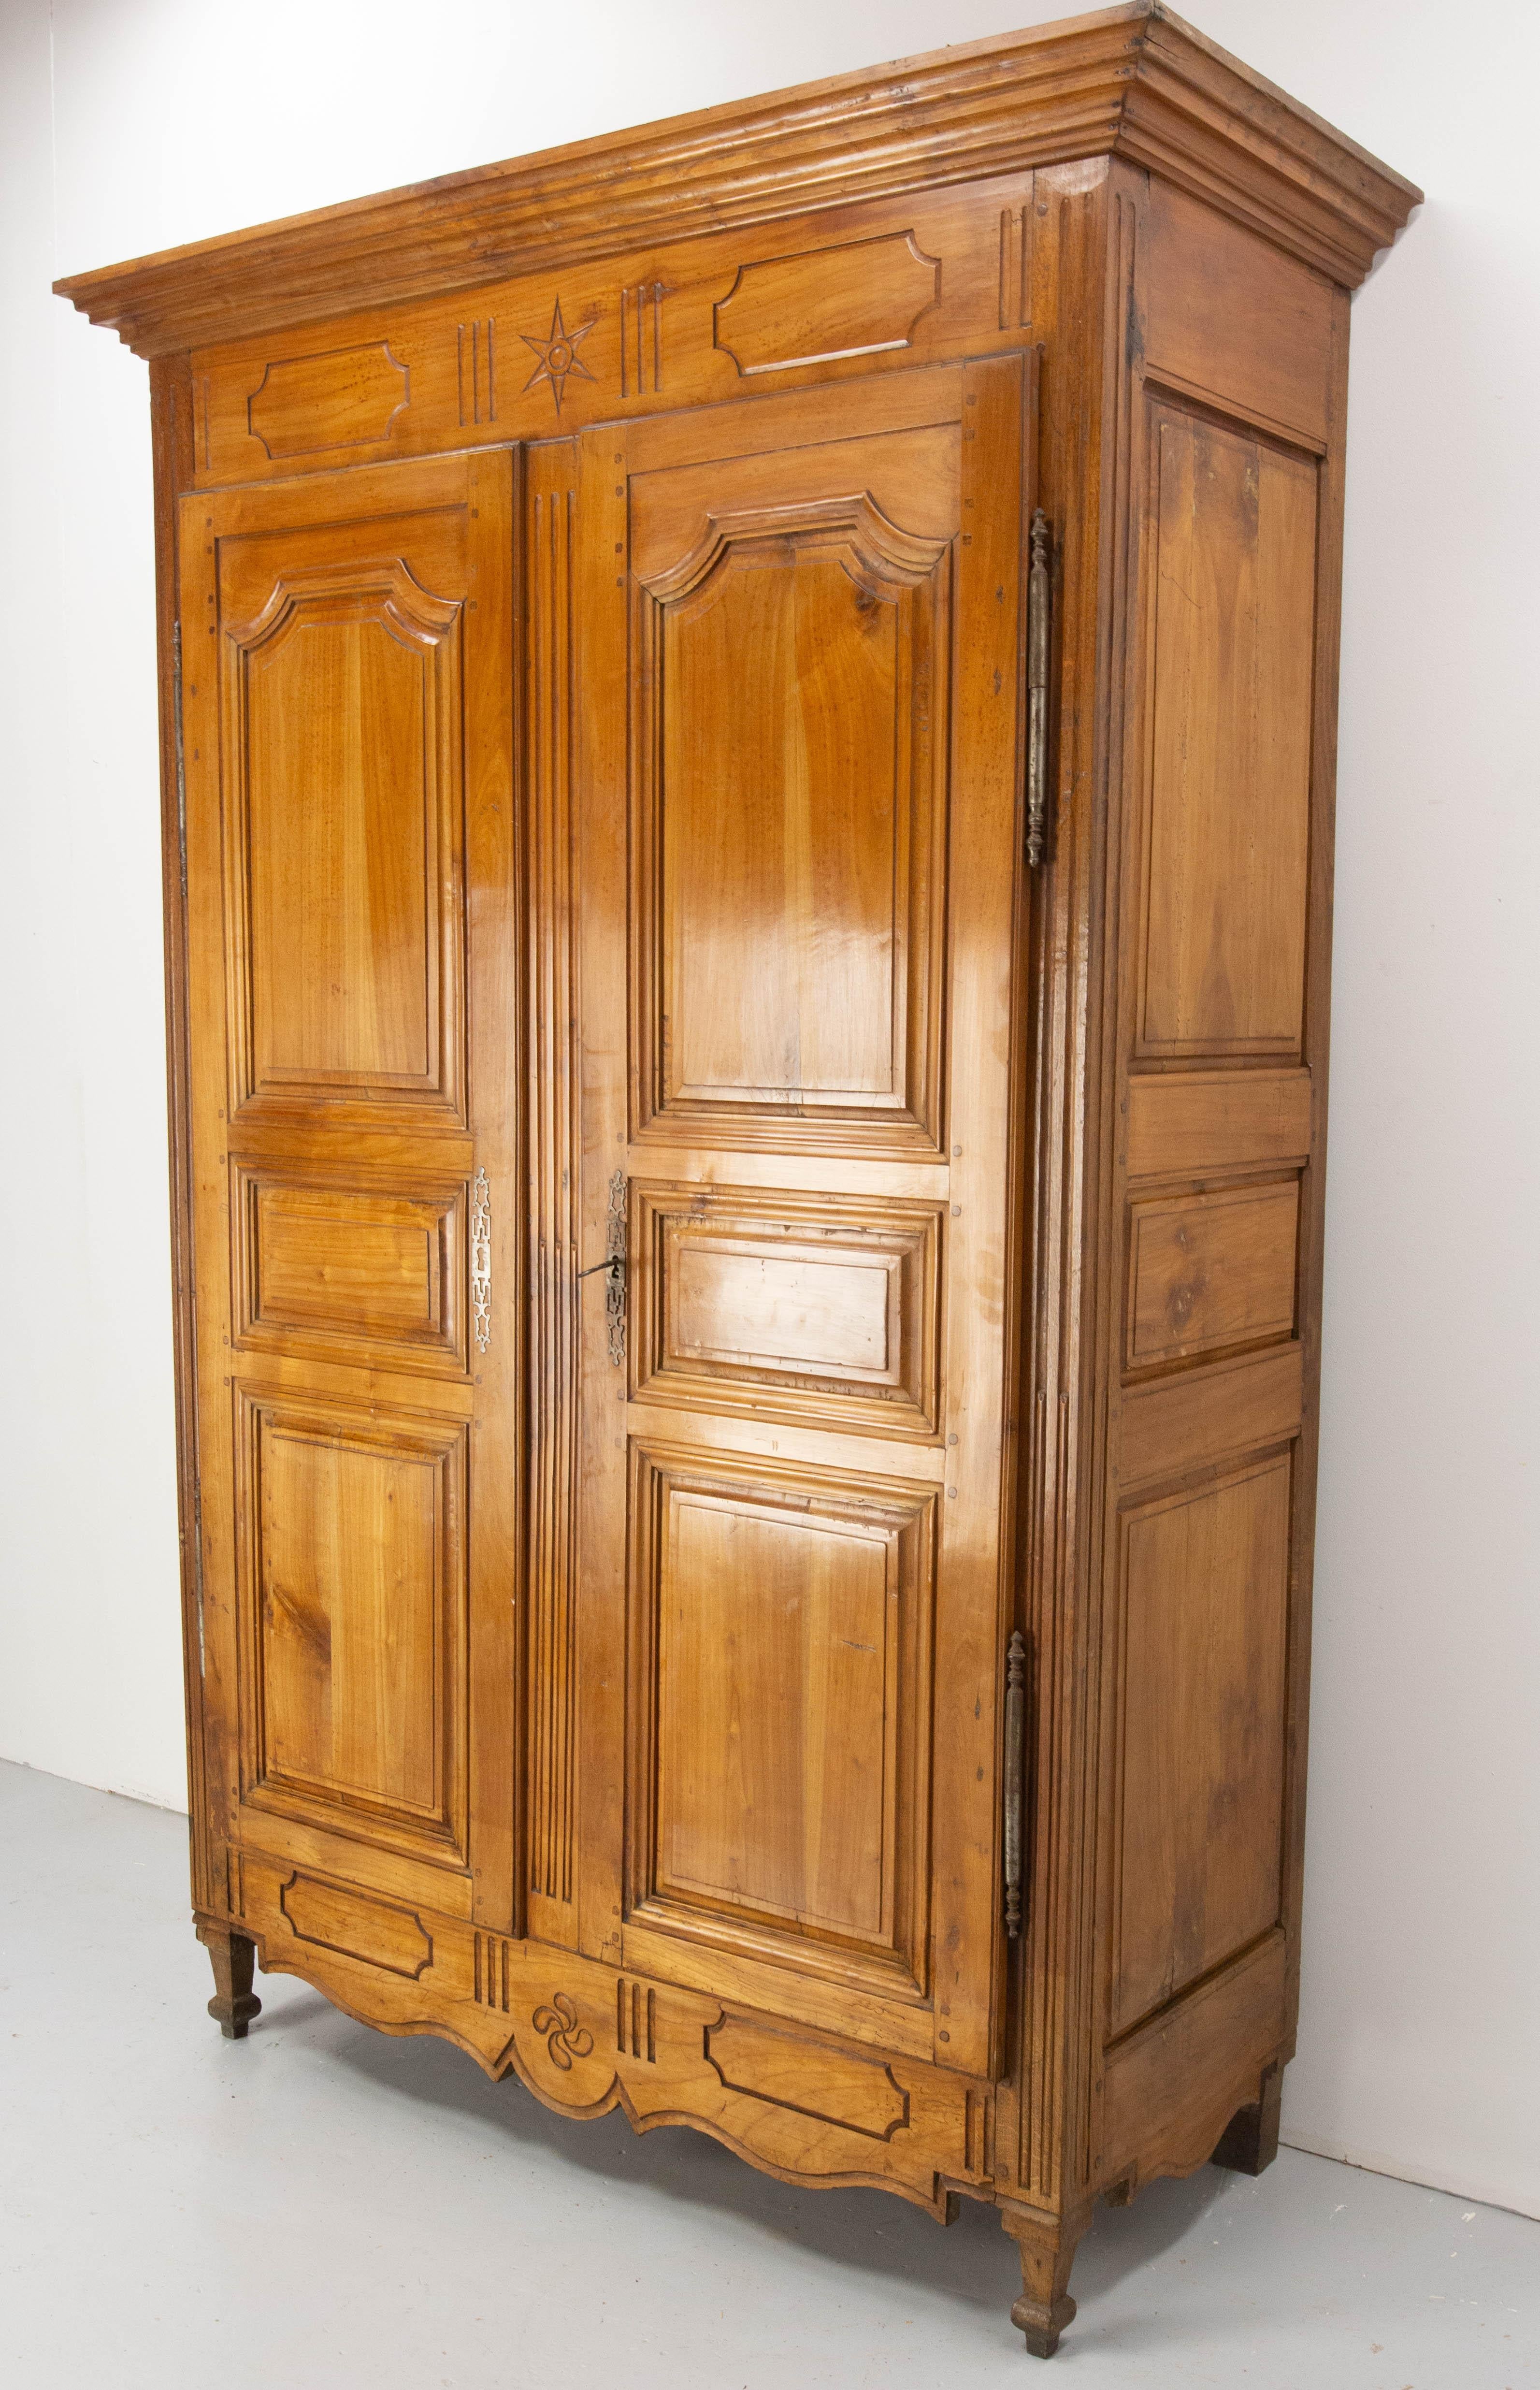 French wardrobe Louis XVI style cherrywood armoire
In wealthy families, wardrobes were given as gifts to newlyweds. They contained all the household linen for future years.
The special feature of this wardrobe is the part that could be locked, to